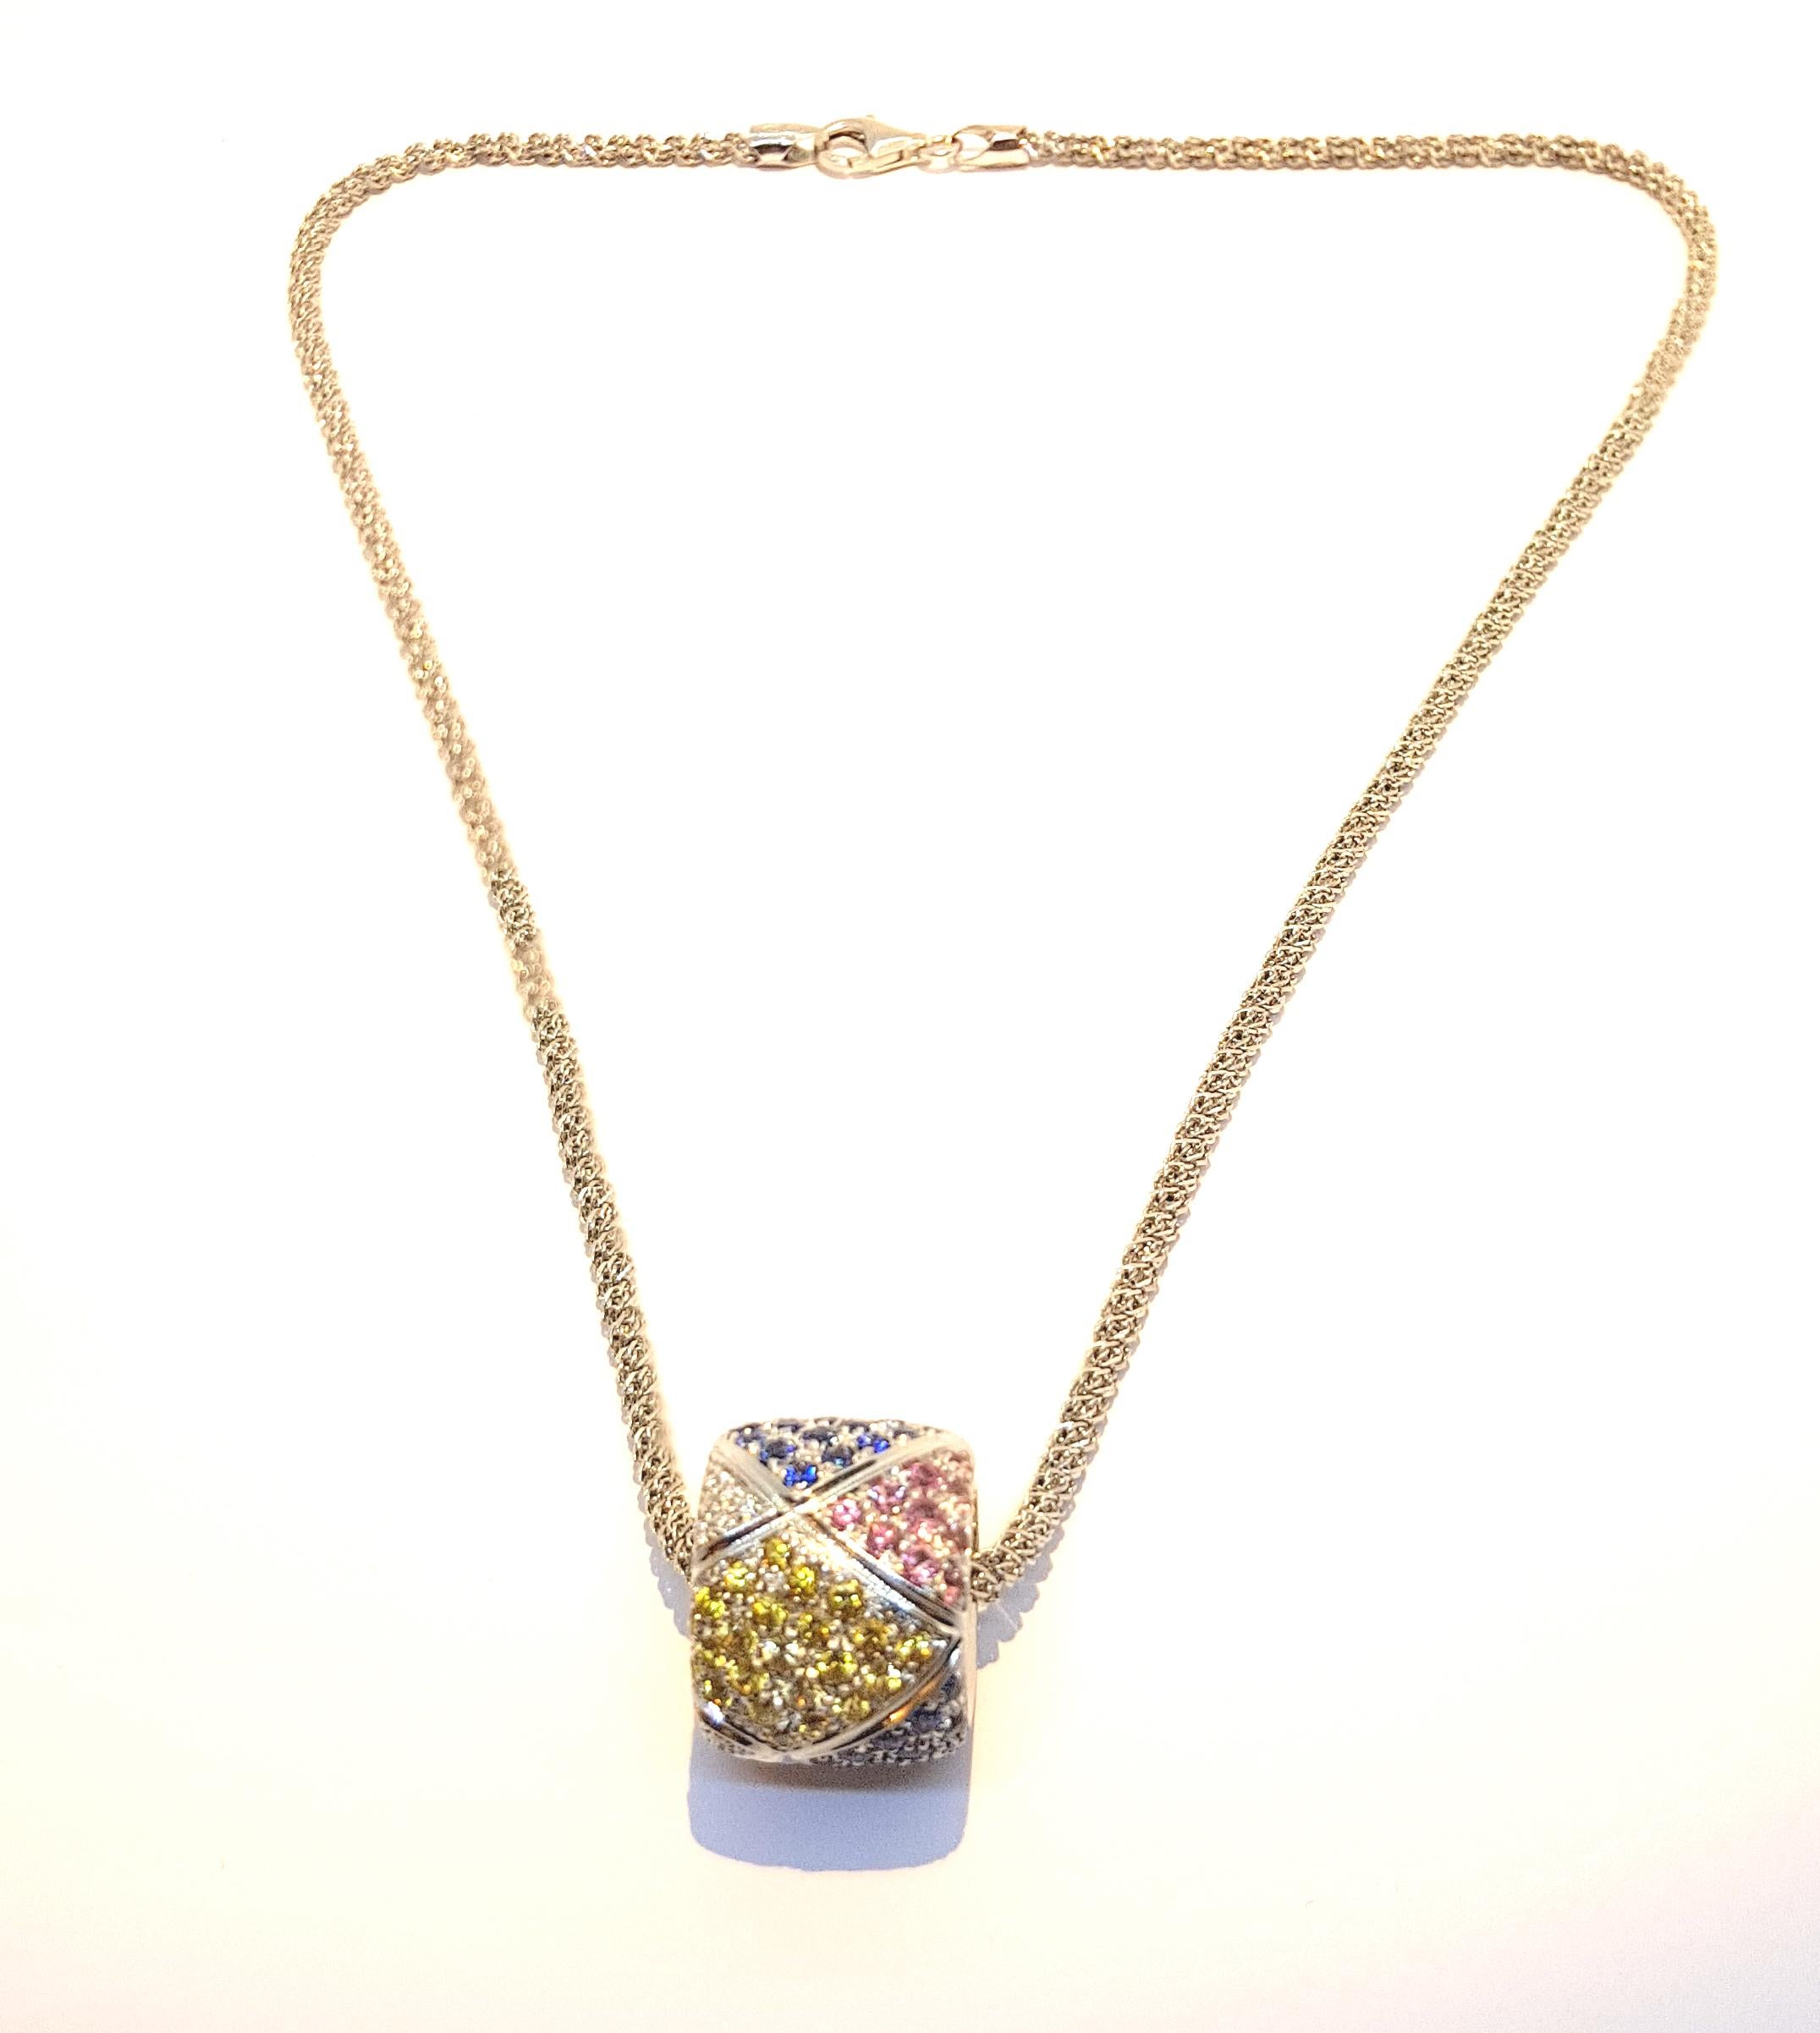 A rainbow dance of multicolored sapphires blue, pink and yellow 93 pieces of .02ct total 18.6ct of saphires
and total 3.45ct of diamonds 
The  18k white gold pendant Weights 15.9gr 
Options of chains are upon request.  The chain in the picture is